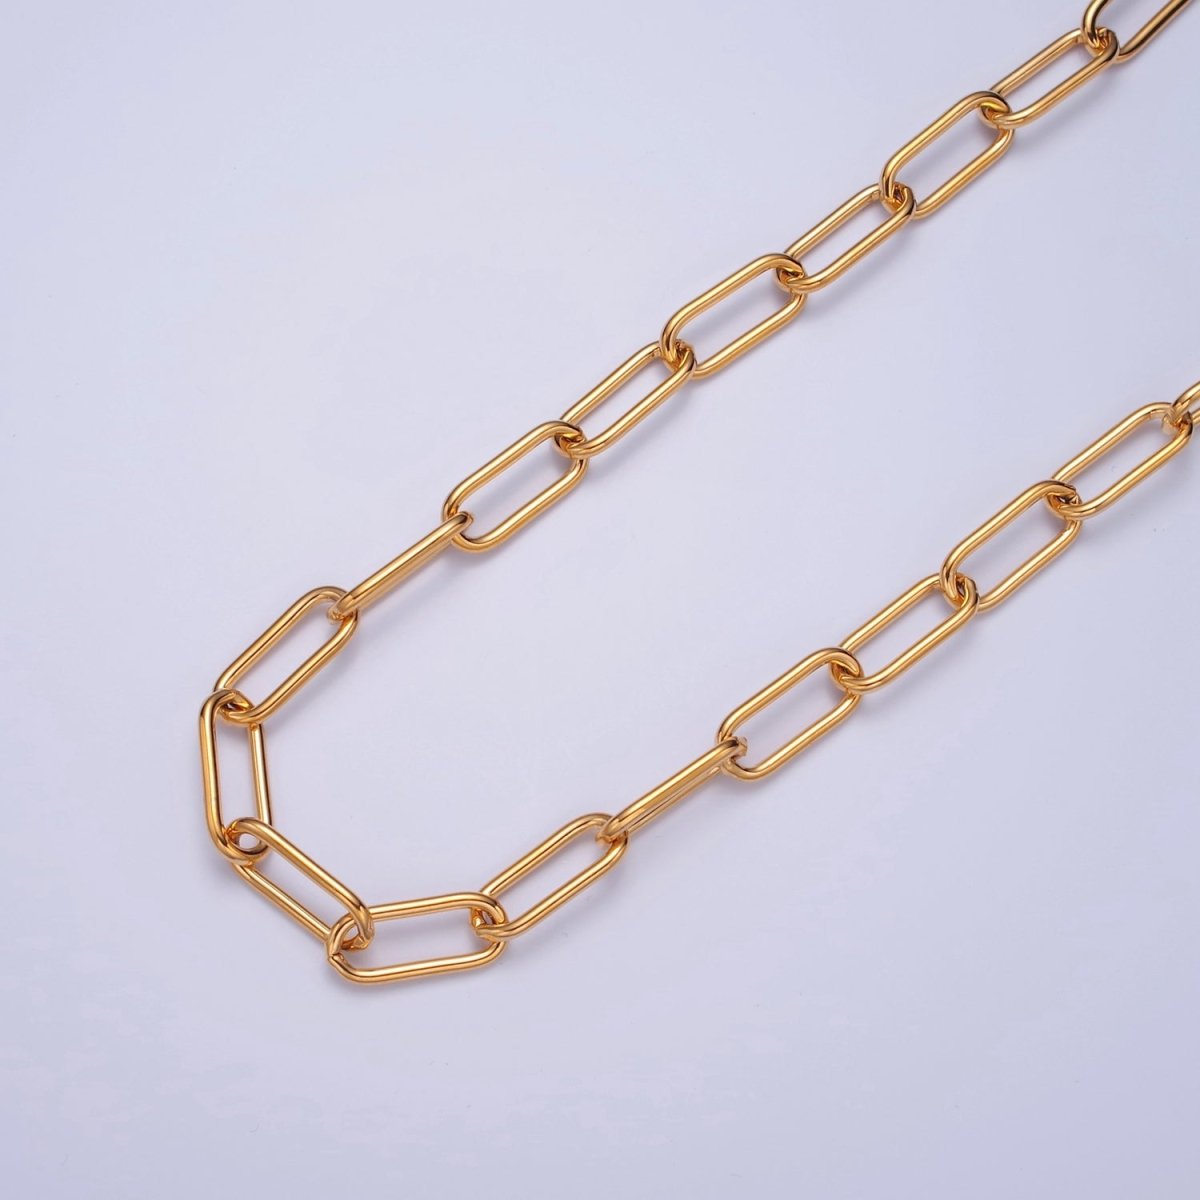 PaperClip Unfinished Chain, 17.5mm x 7.3mm, 24k Gold Filled Chain 19.5 inch long | WA-1378 Clearance Pricing - DLUXCA